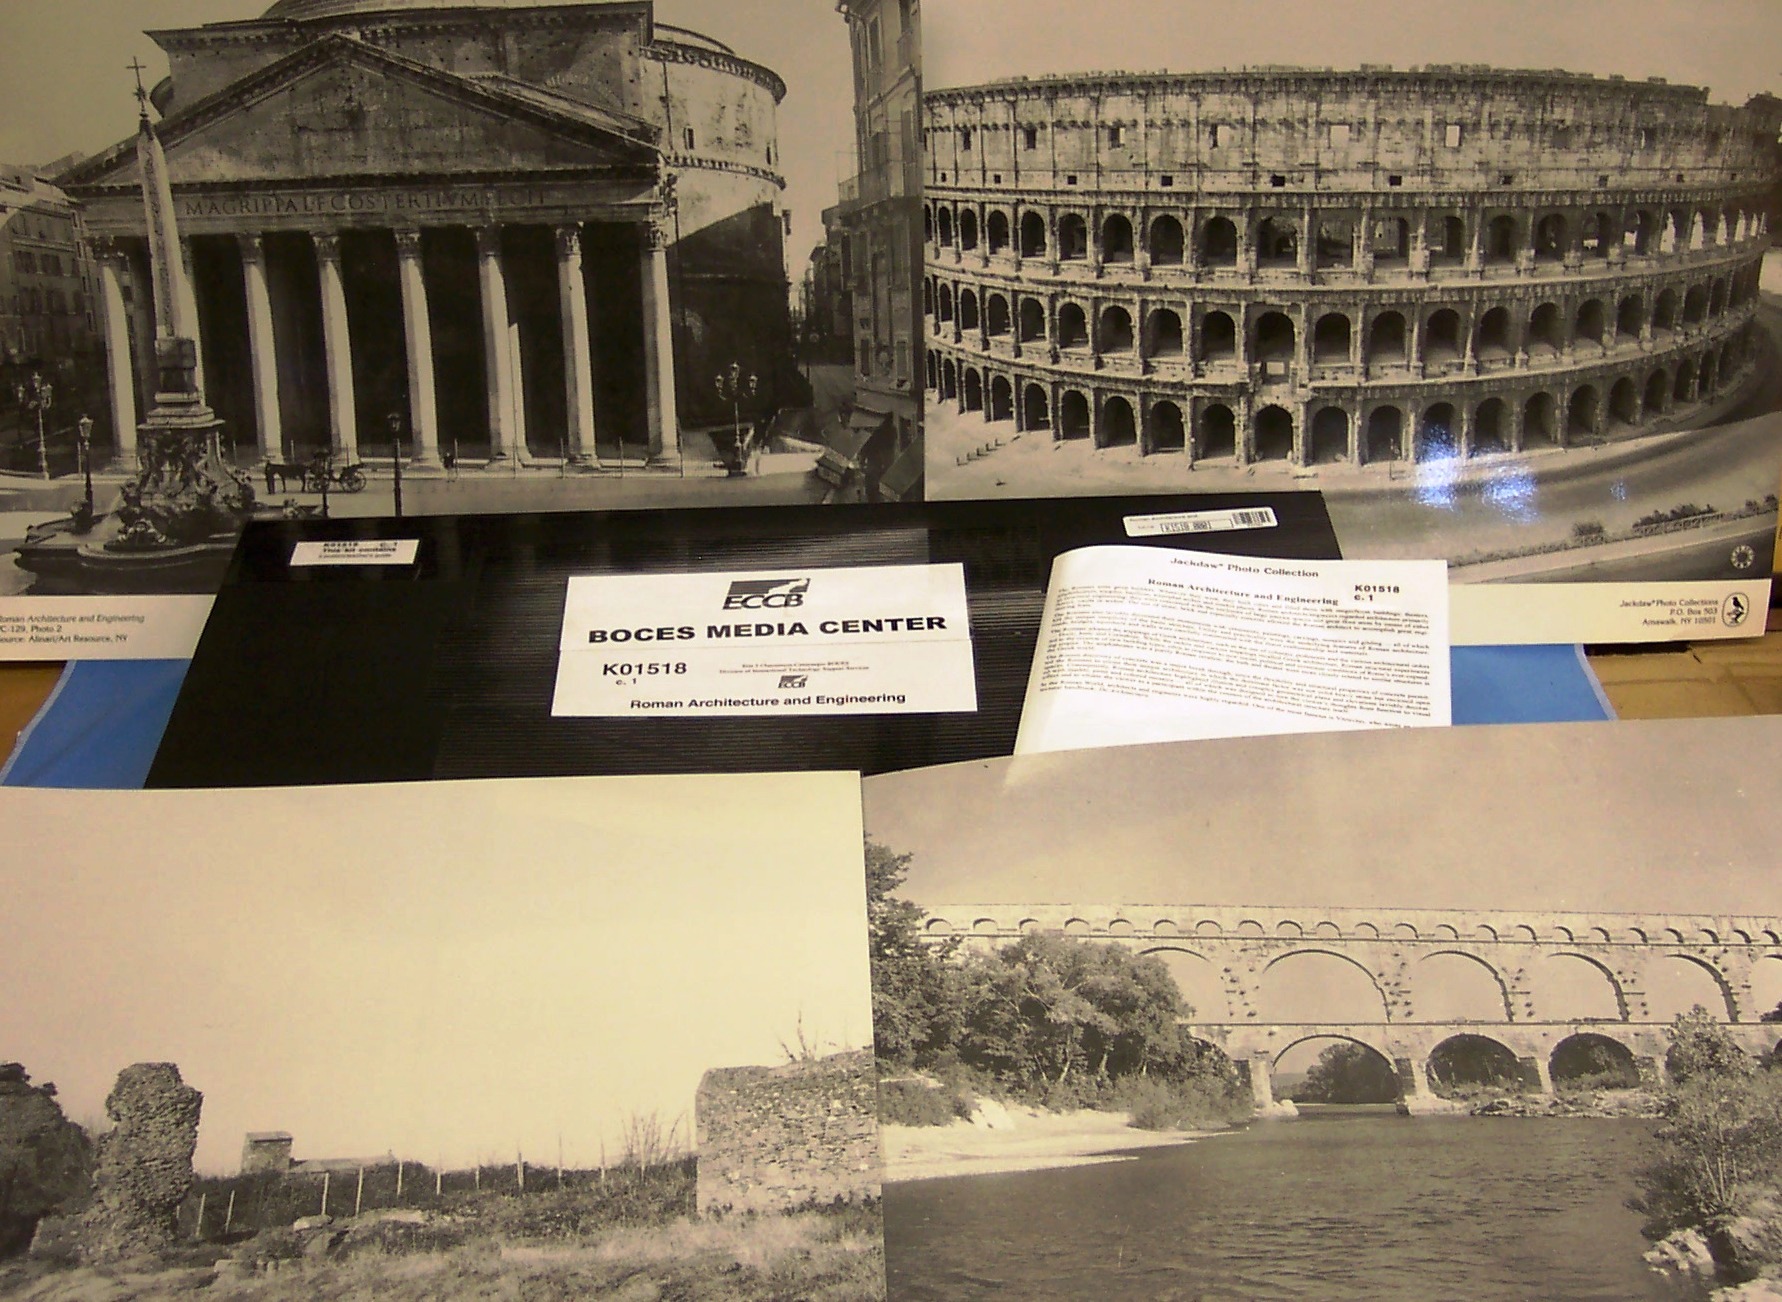 Roman Architecture and Engineering